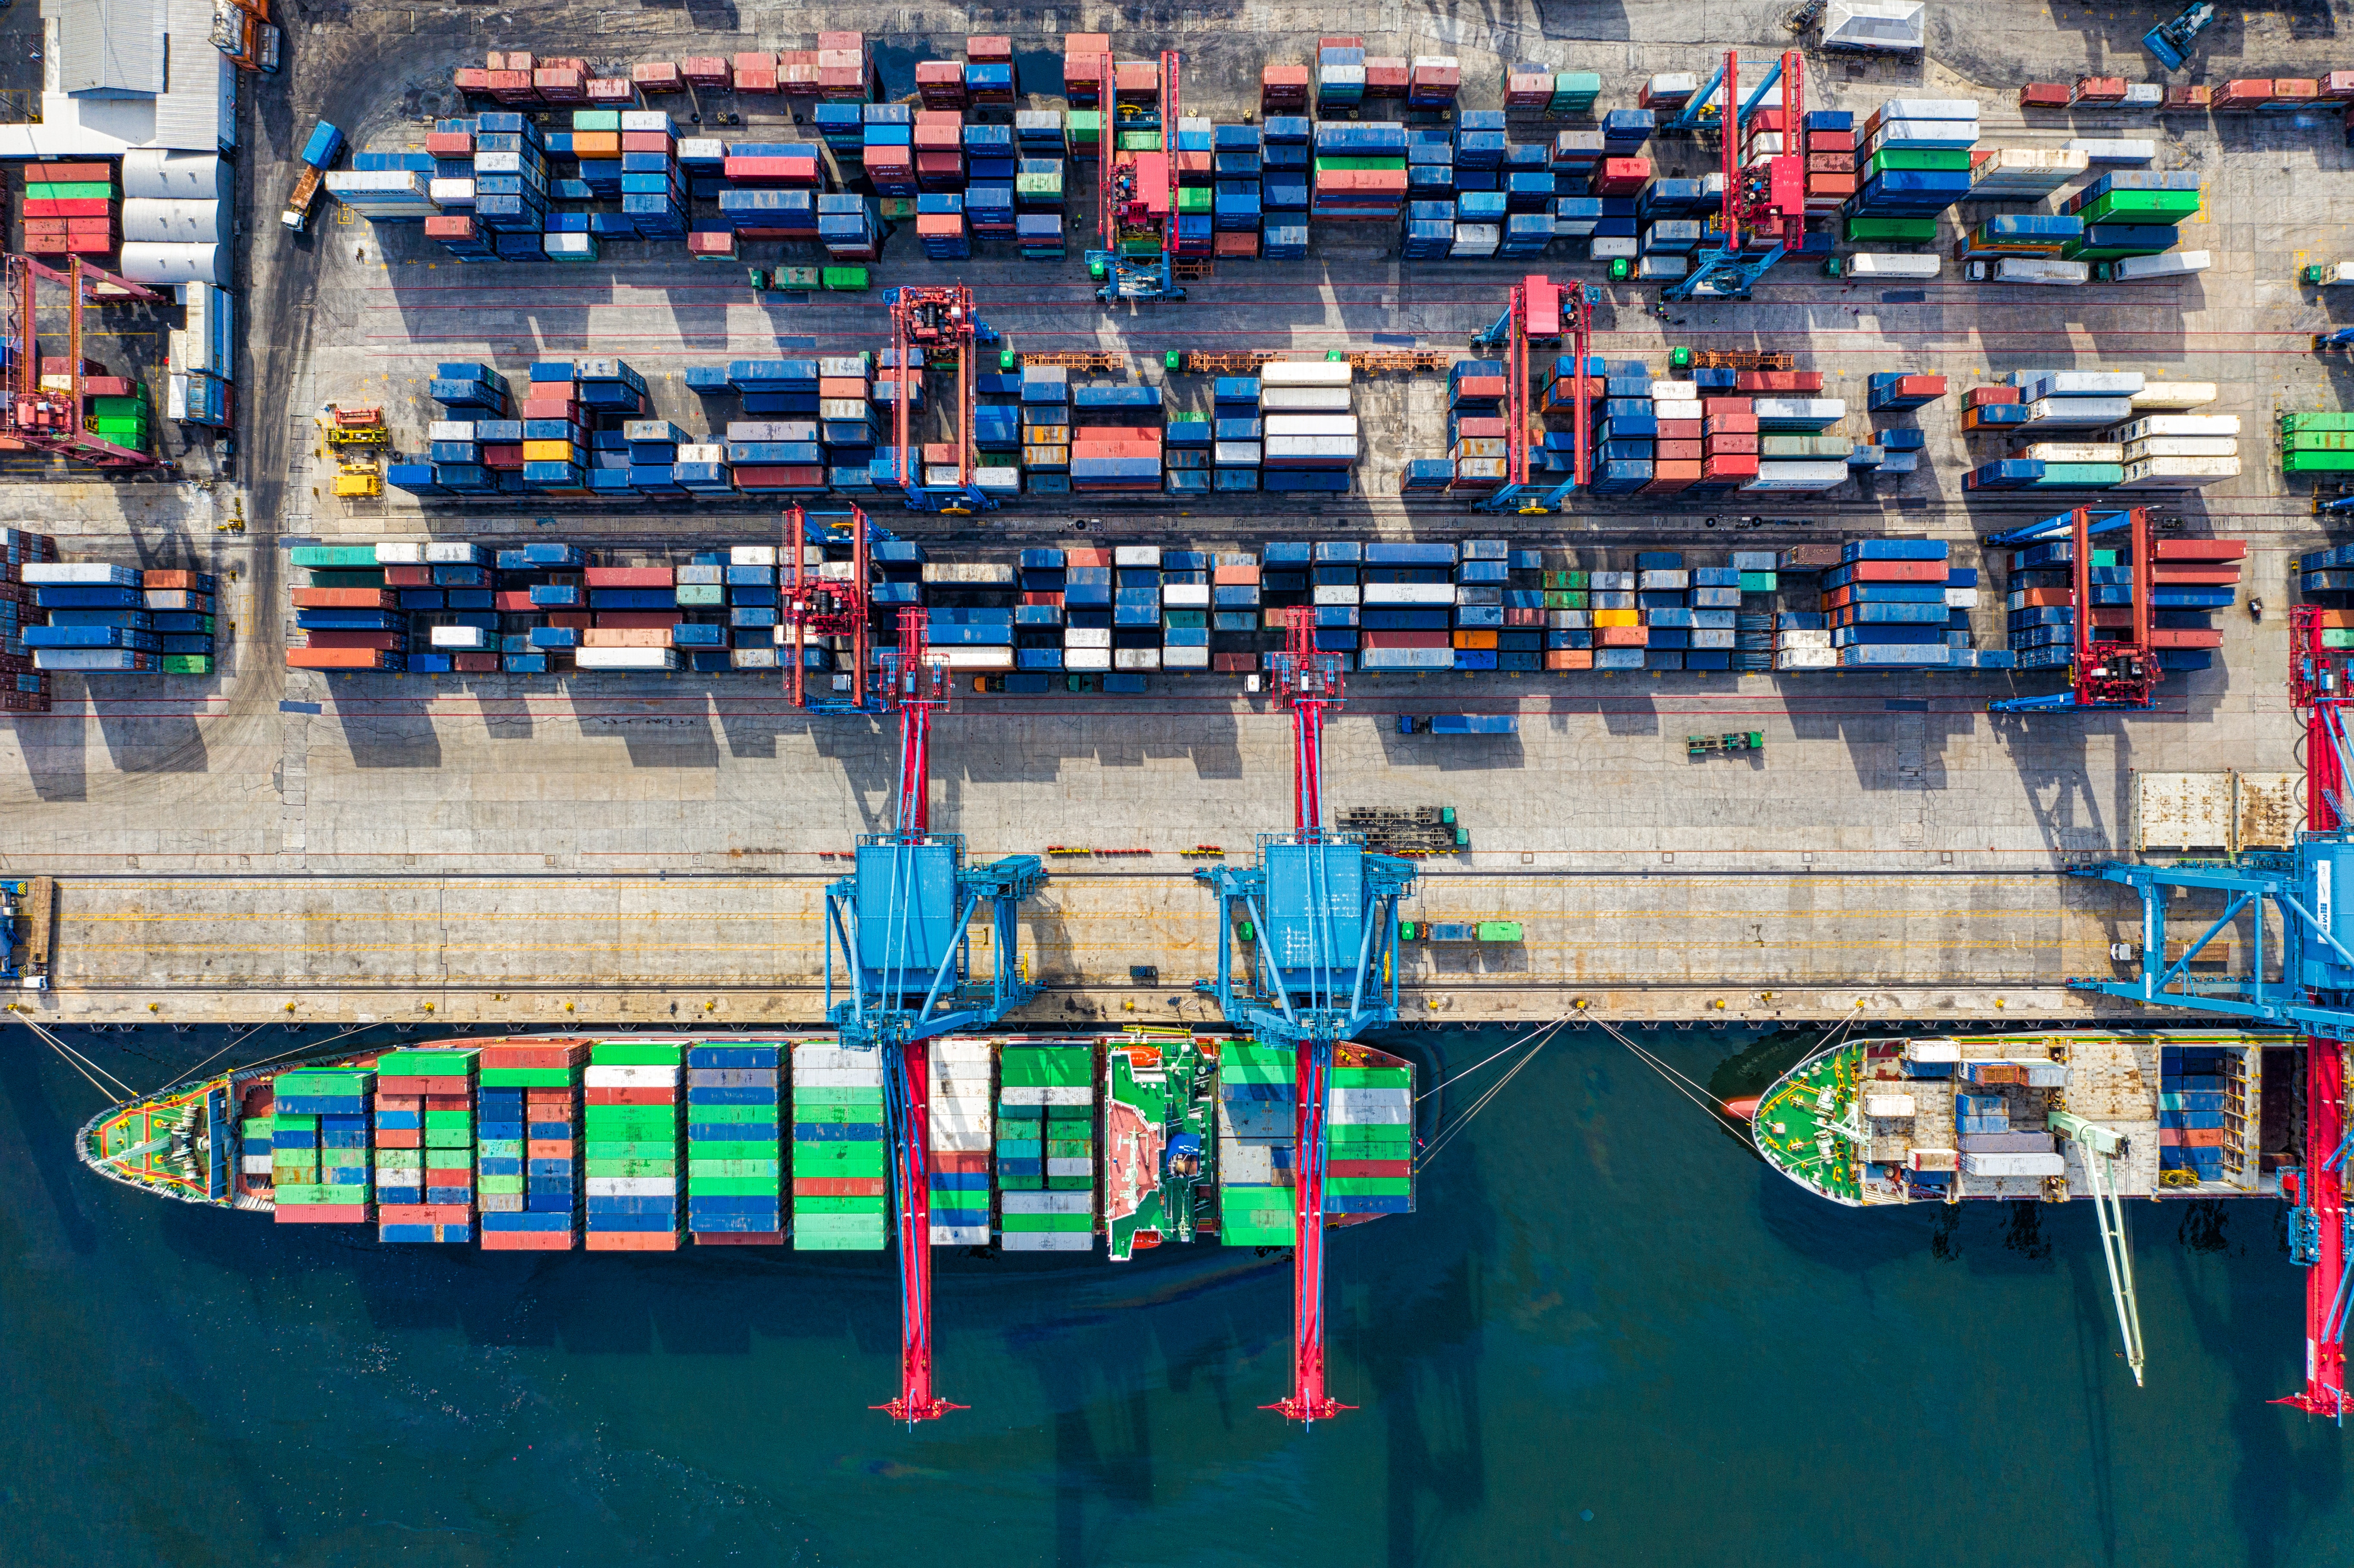 Image of shipping containers and cranes